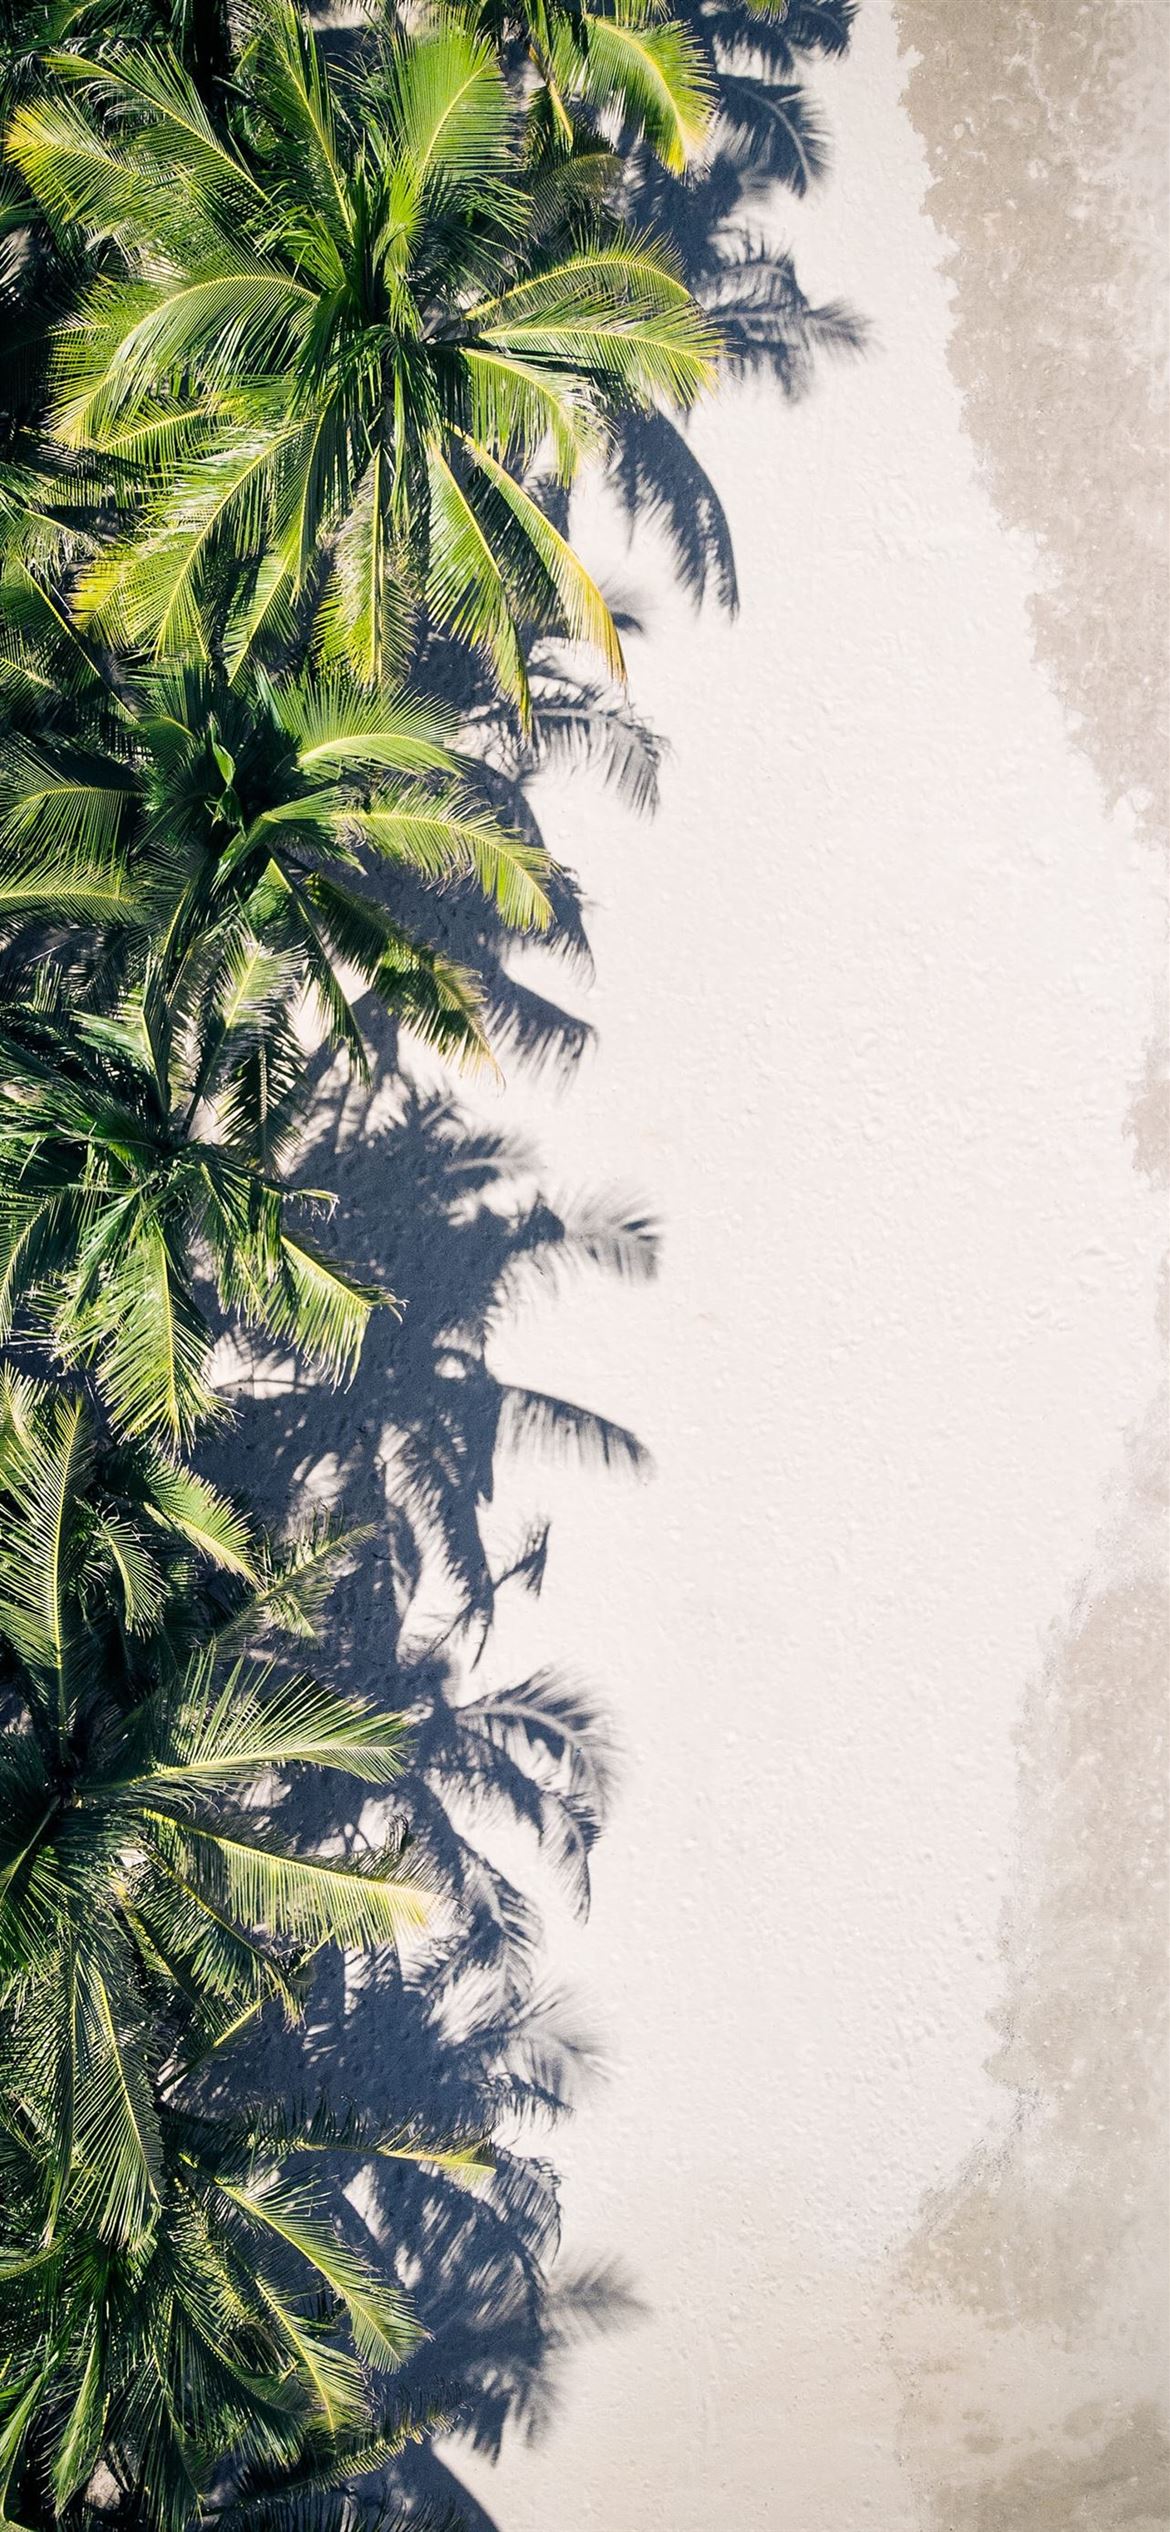 Details more than 70 palm trees aesthetic wallpaper - in.cdgdbentre